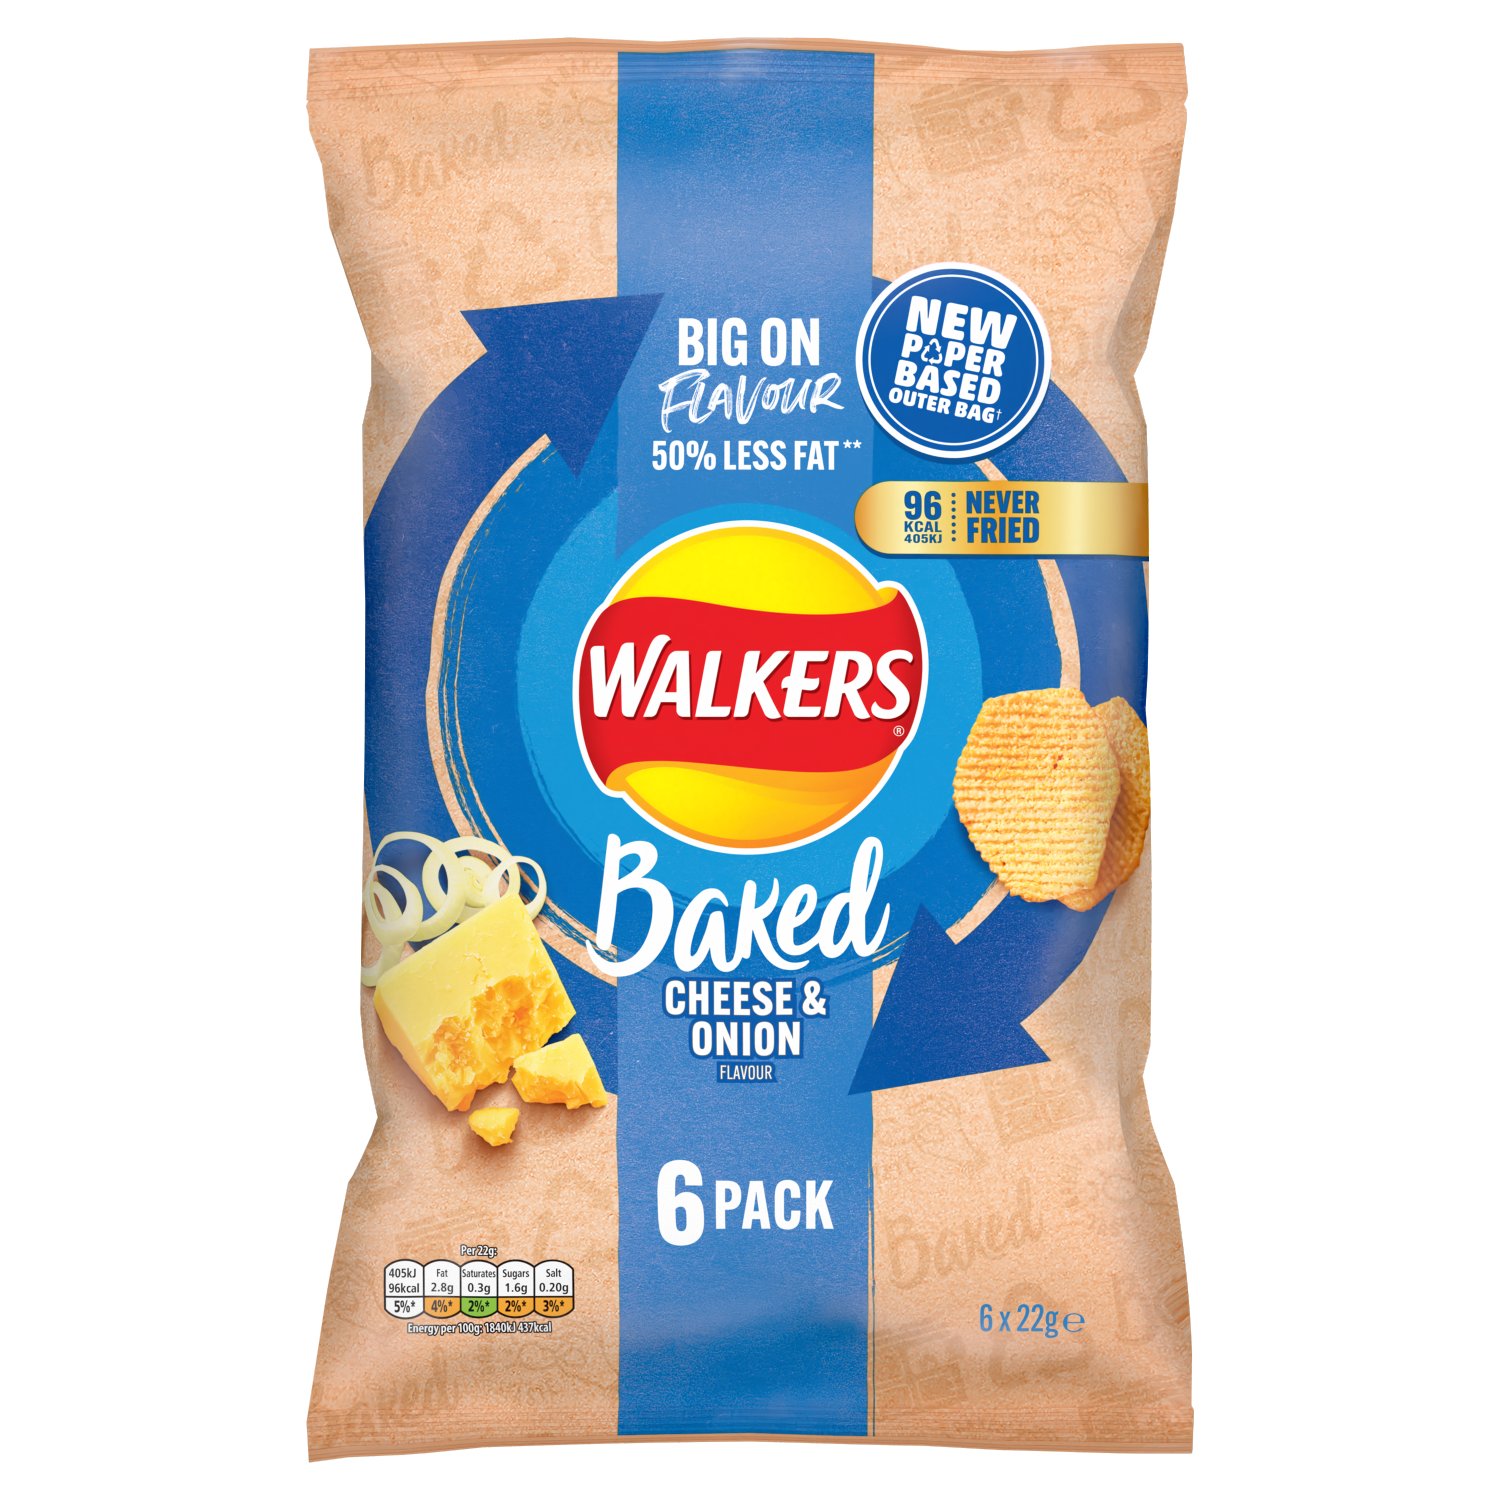 Walkers Baked Crisps Cheese & Onion 6 Pack (22 g)